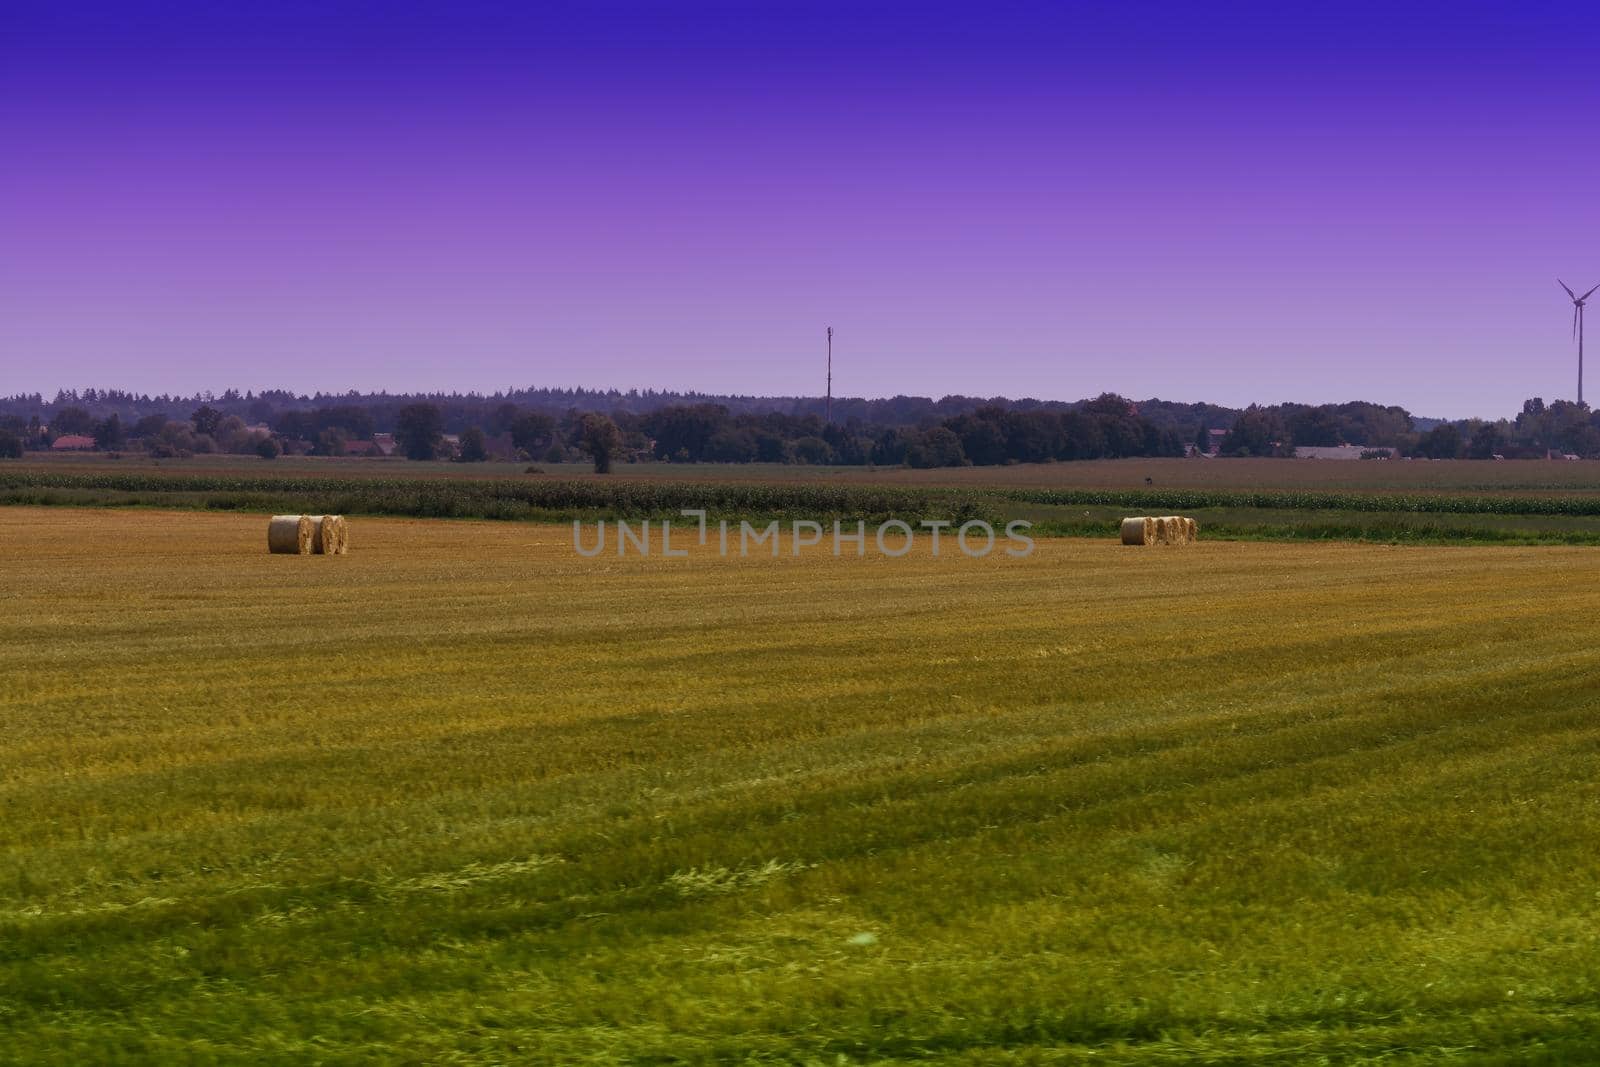 Hay bales on the stubble field           by JFsPic